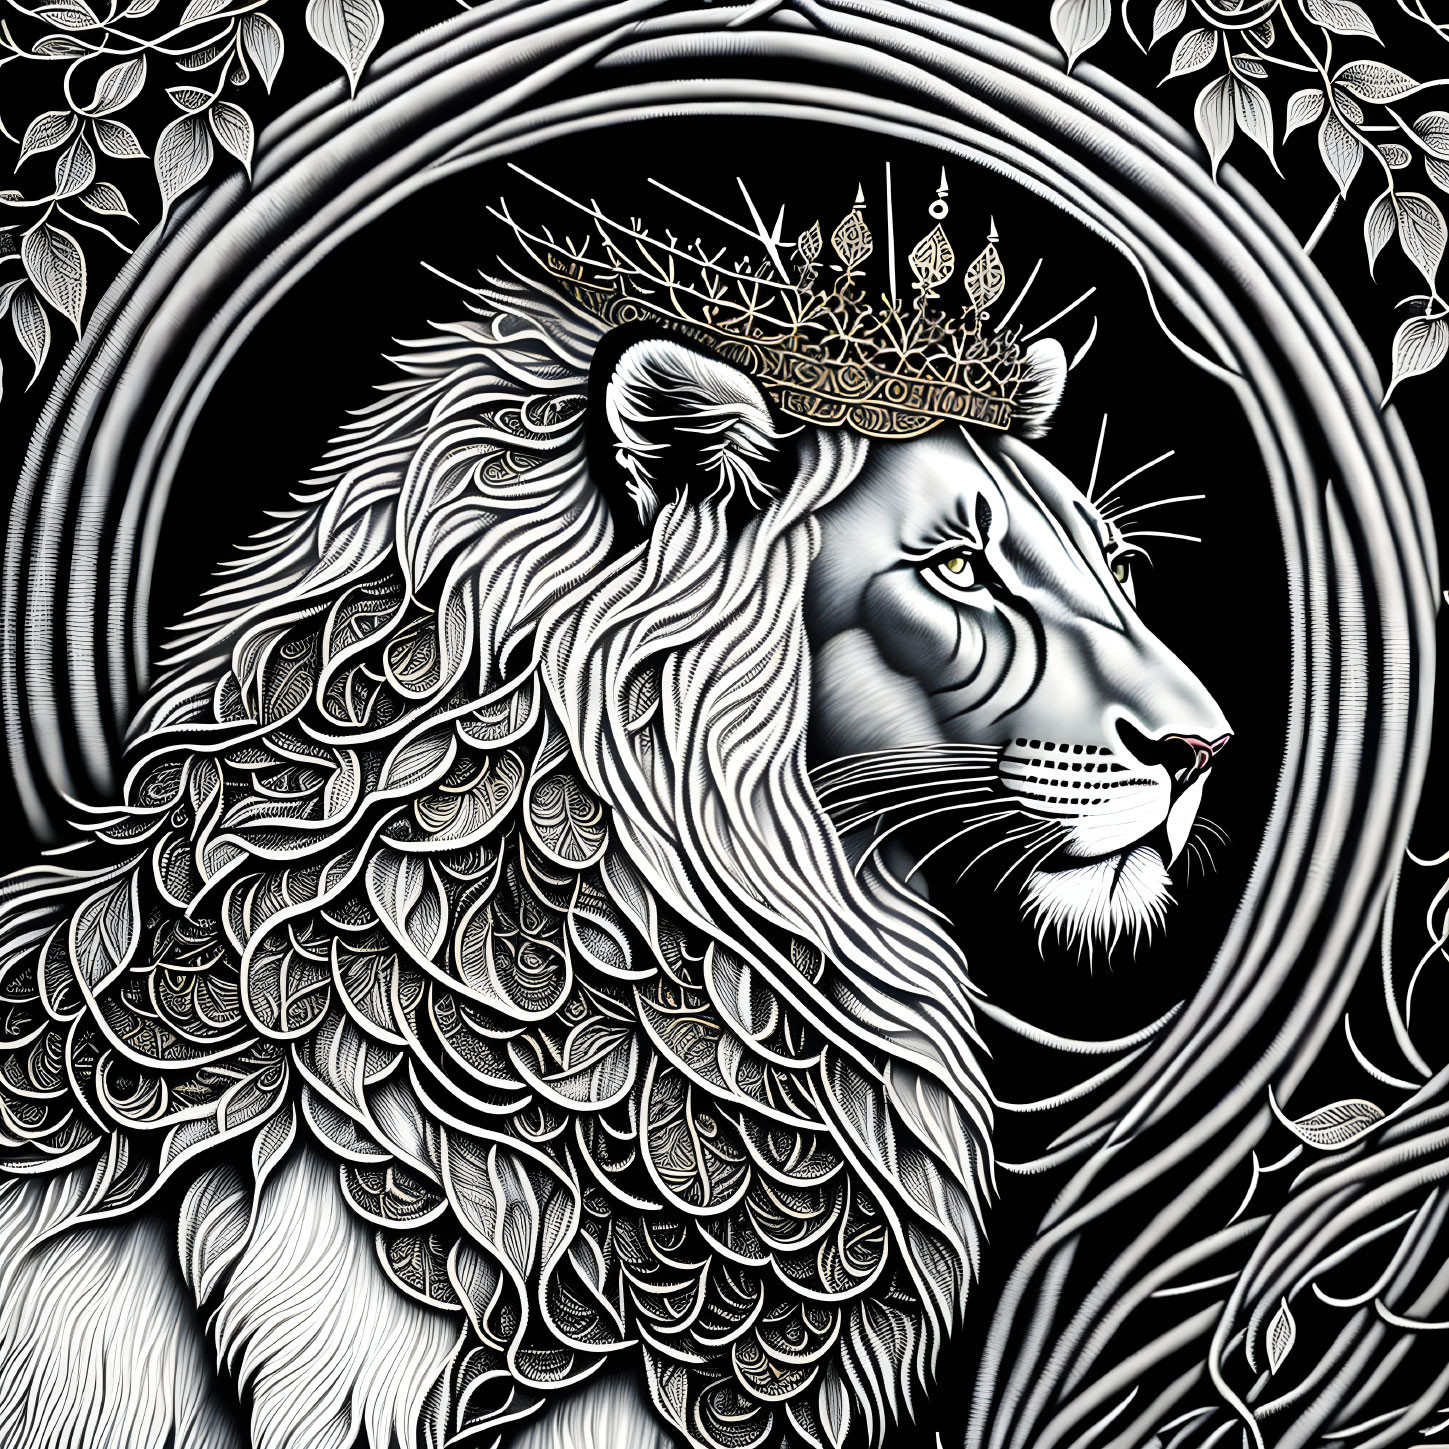 Detailed monochromatic lion illustration with crown and swirling patterns